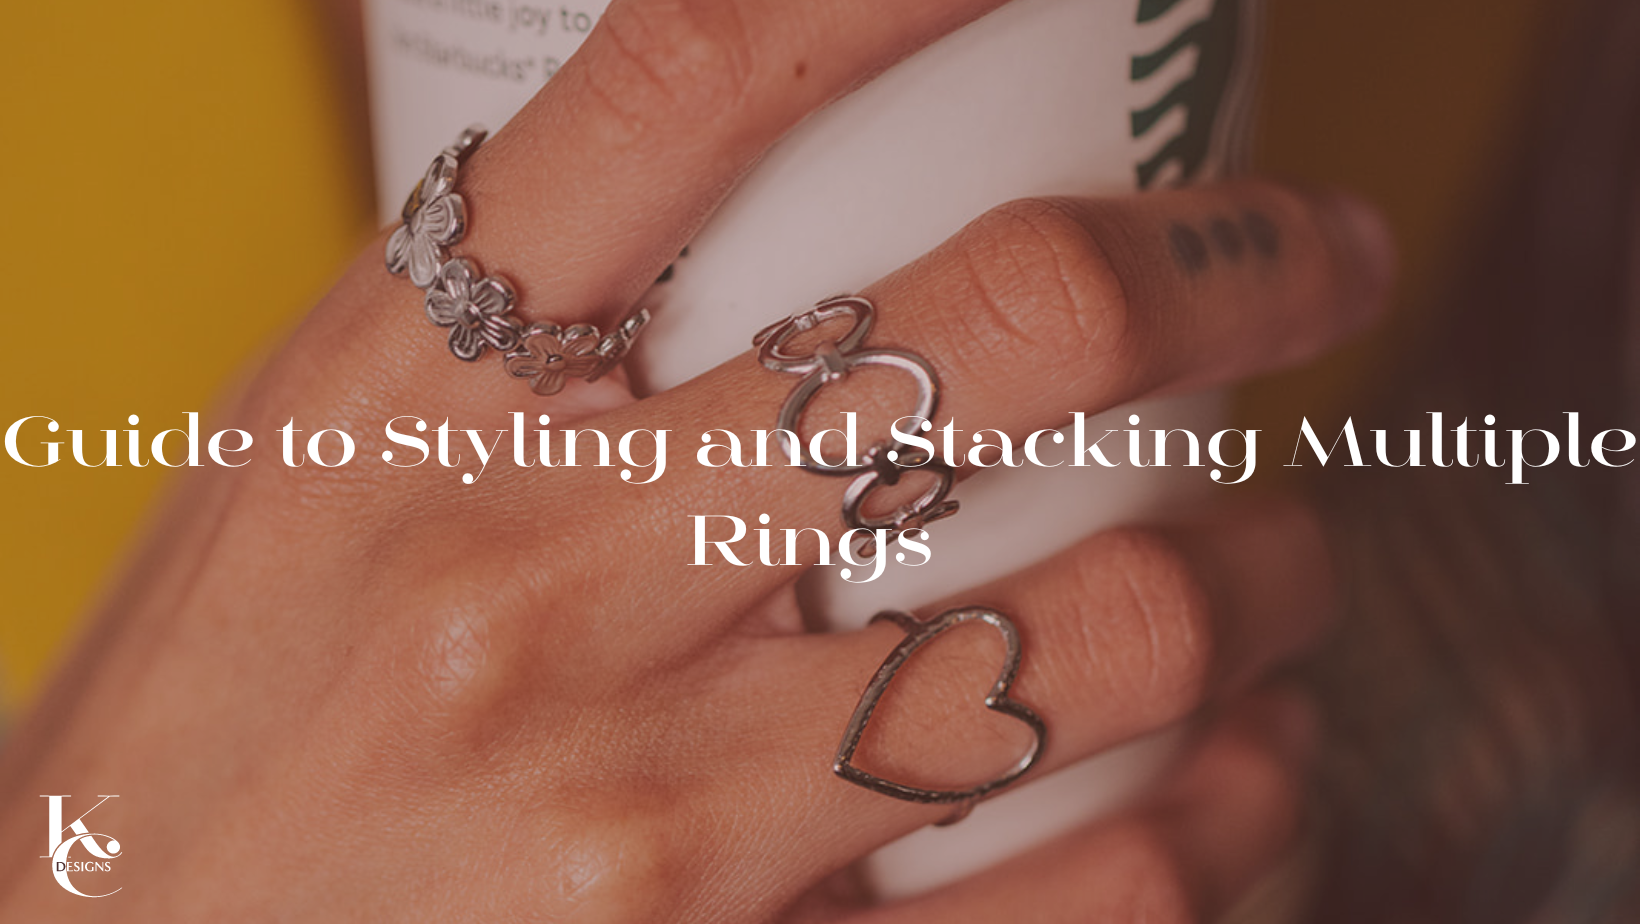 Guide to Styling and Stacking Multiple Rings